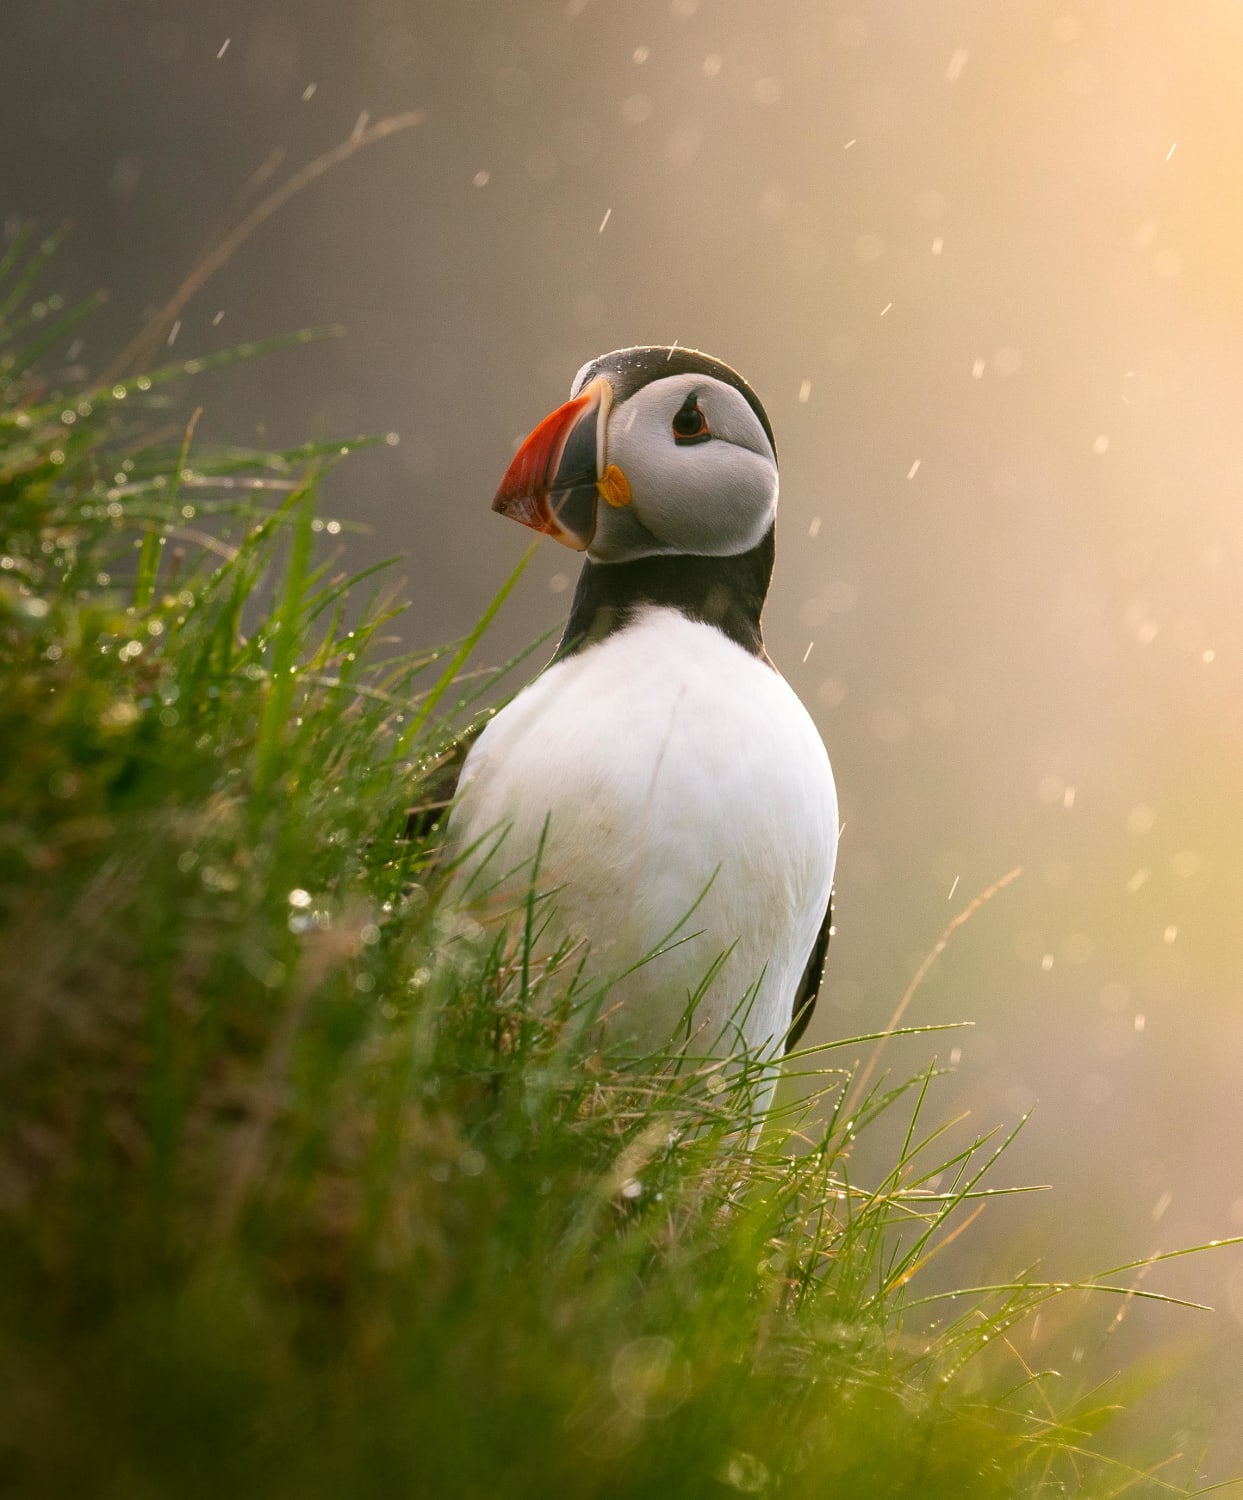 Puffin caught at sunset on Faroe Islands